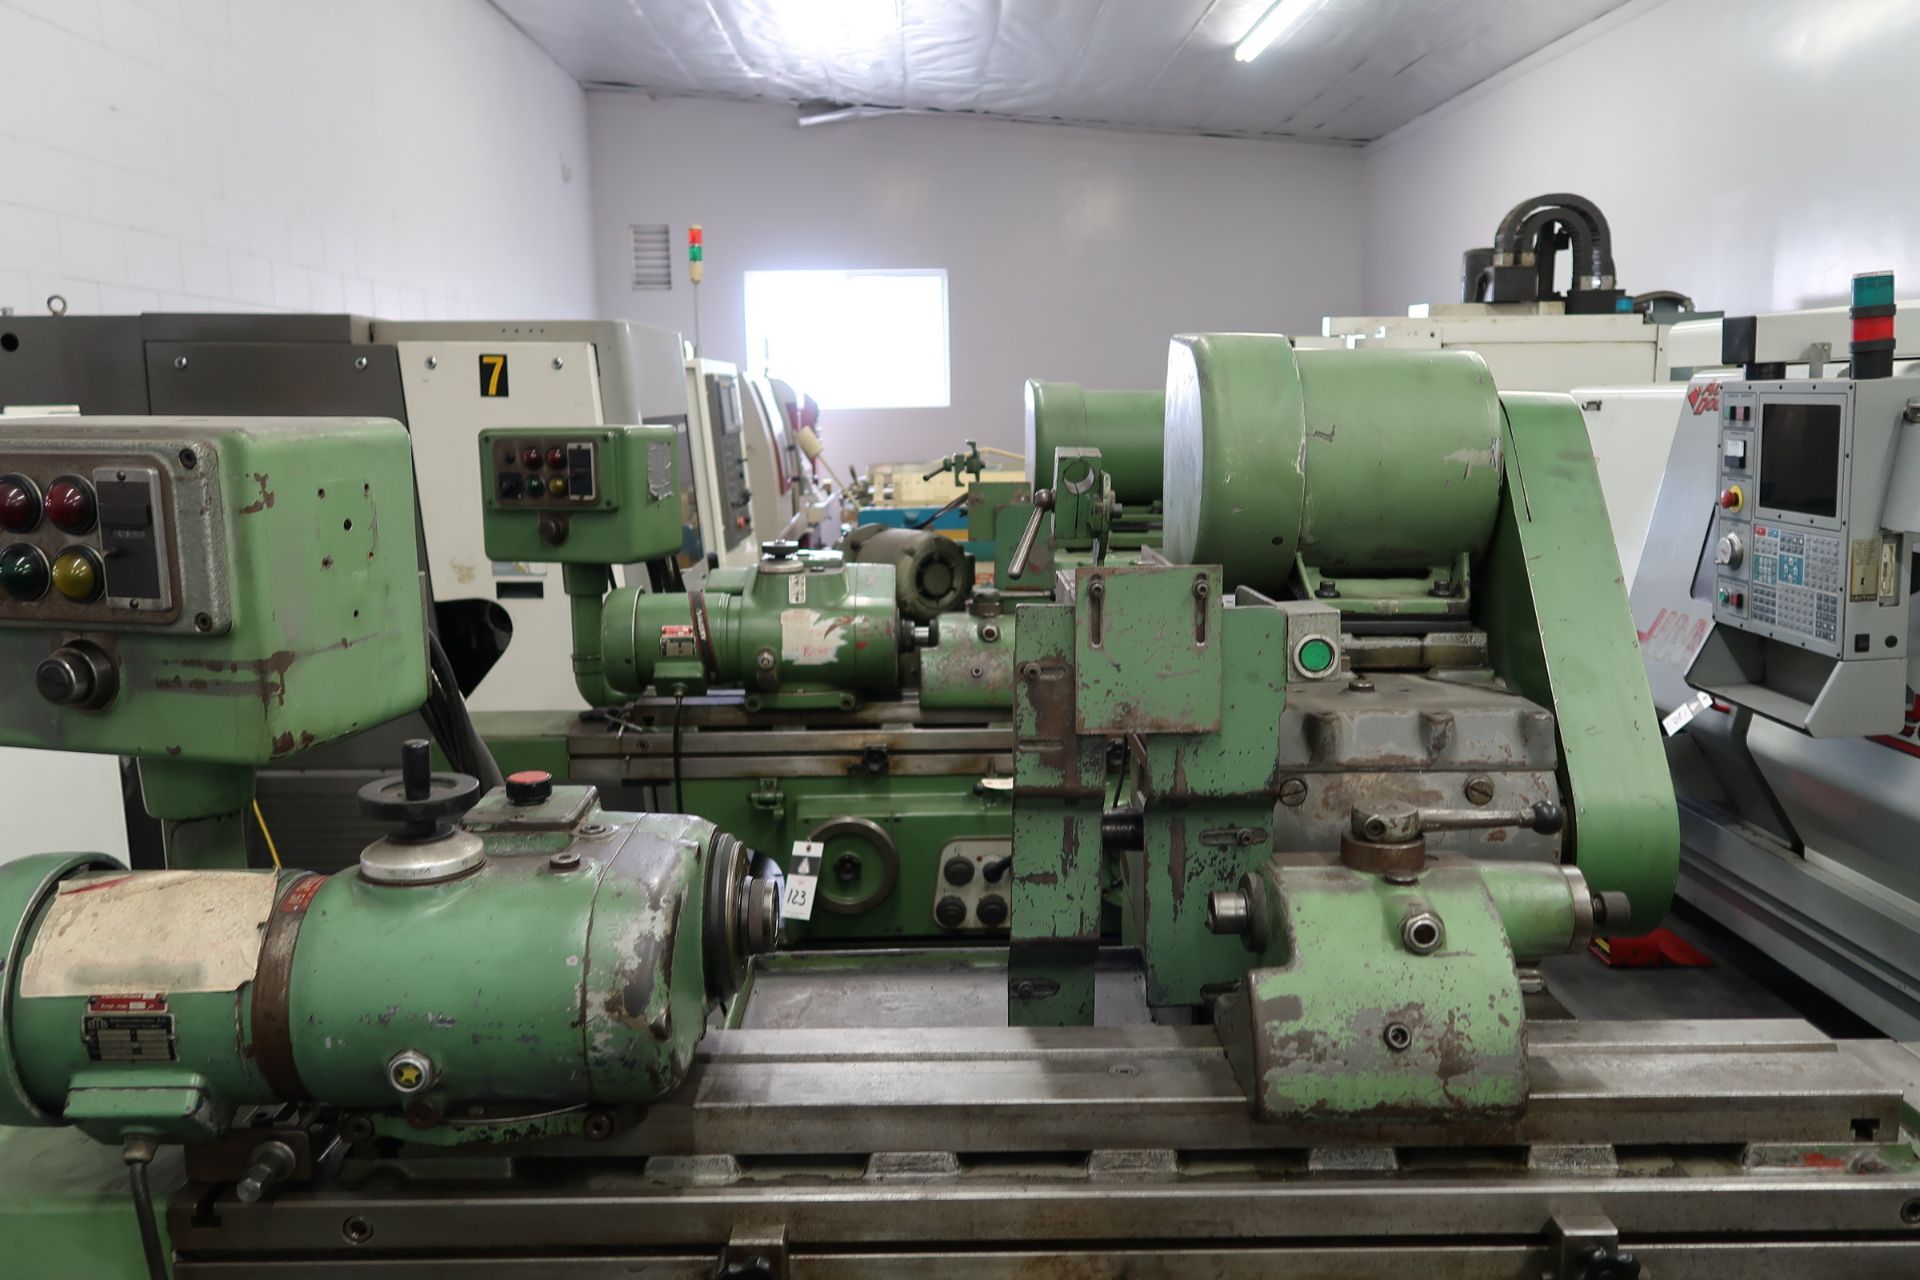 Tschudin HTG400 8” x 24” Cyl Grinder s/n 691302 w/ Motorized 5C Work Head, Tailstock, SOLD AS IS - Image 4 of 9